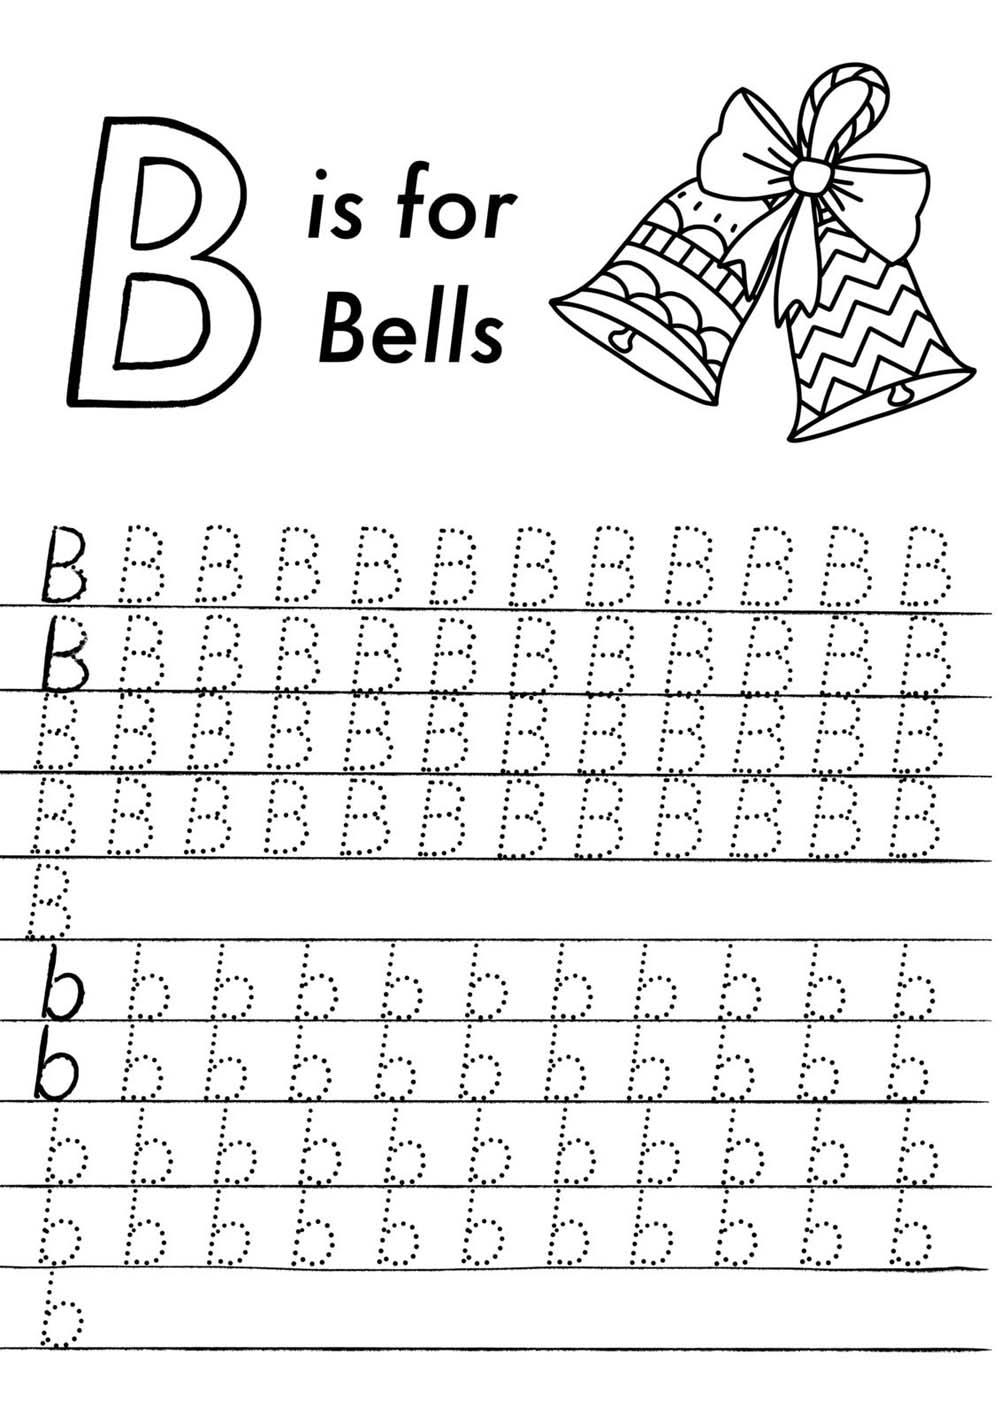 handwriting-practice-for-capital-and-small-letter-b-using-our-picture